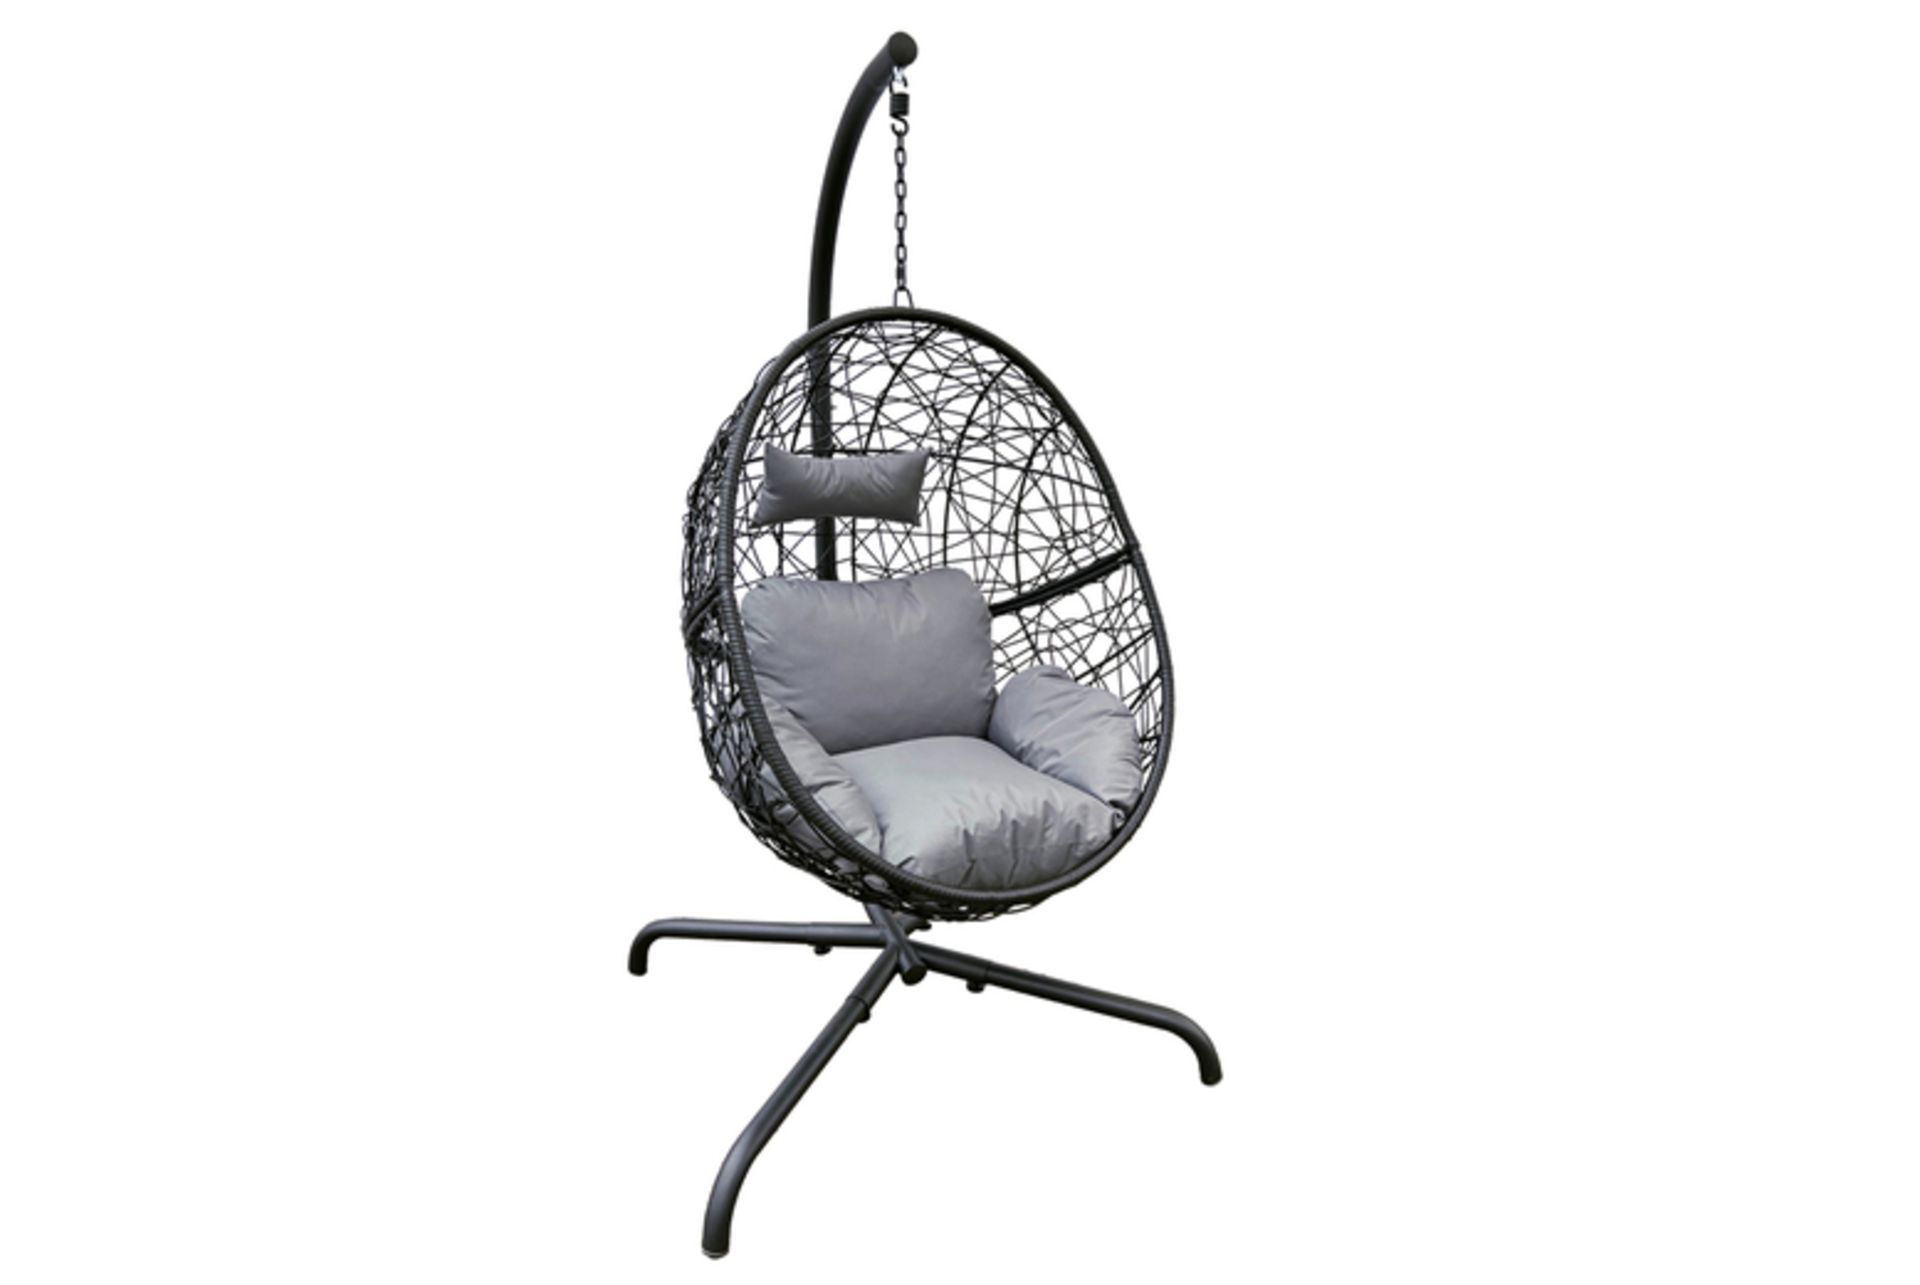 Free Delivery - Job lot of 5 x New Rattan Hanging Egg Chair With A Cushion and Pillow - Black - Image 2 of 2